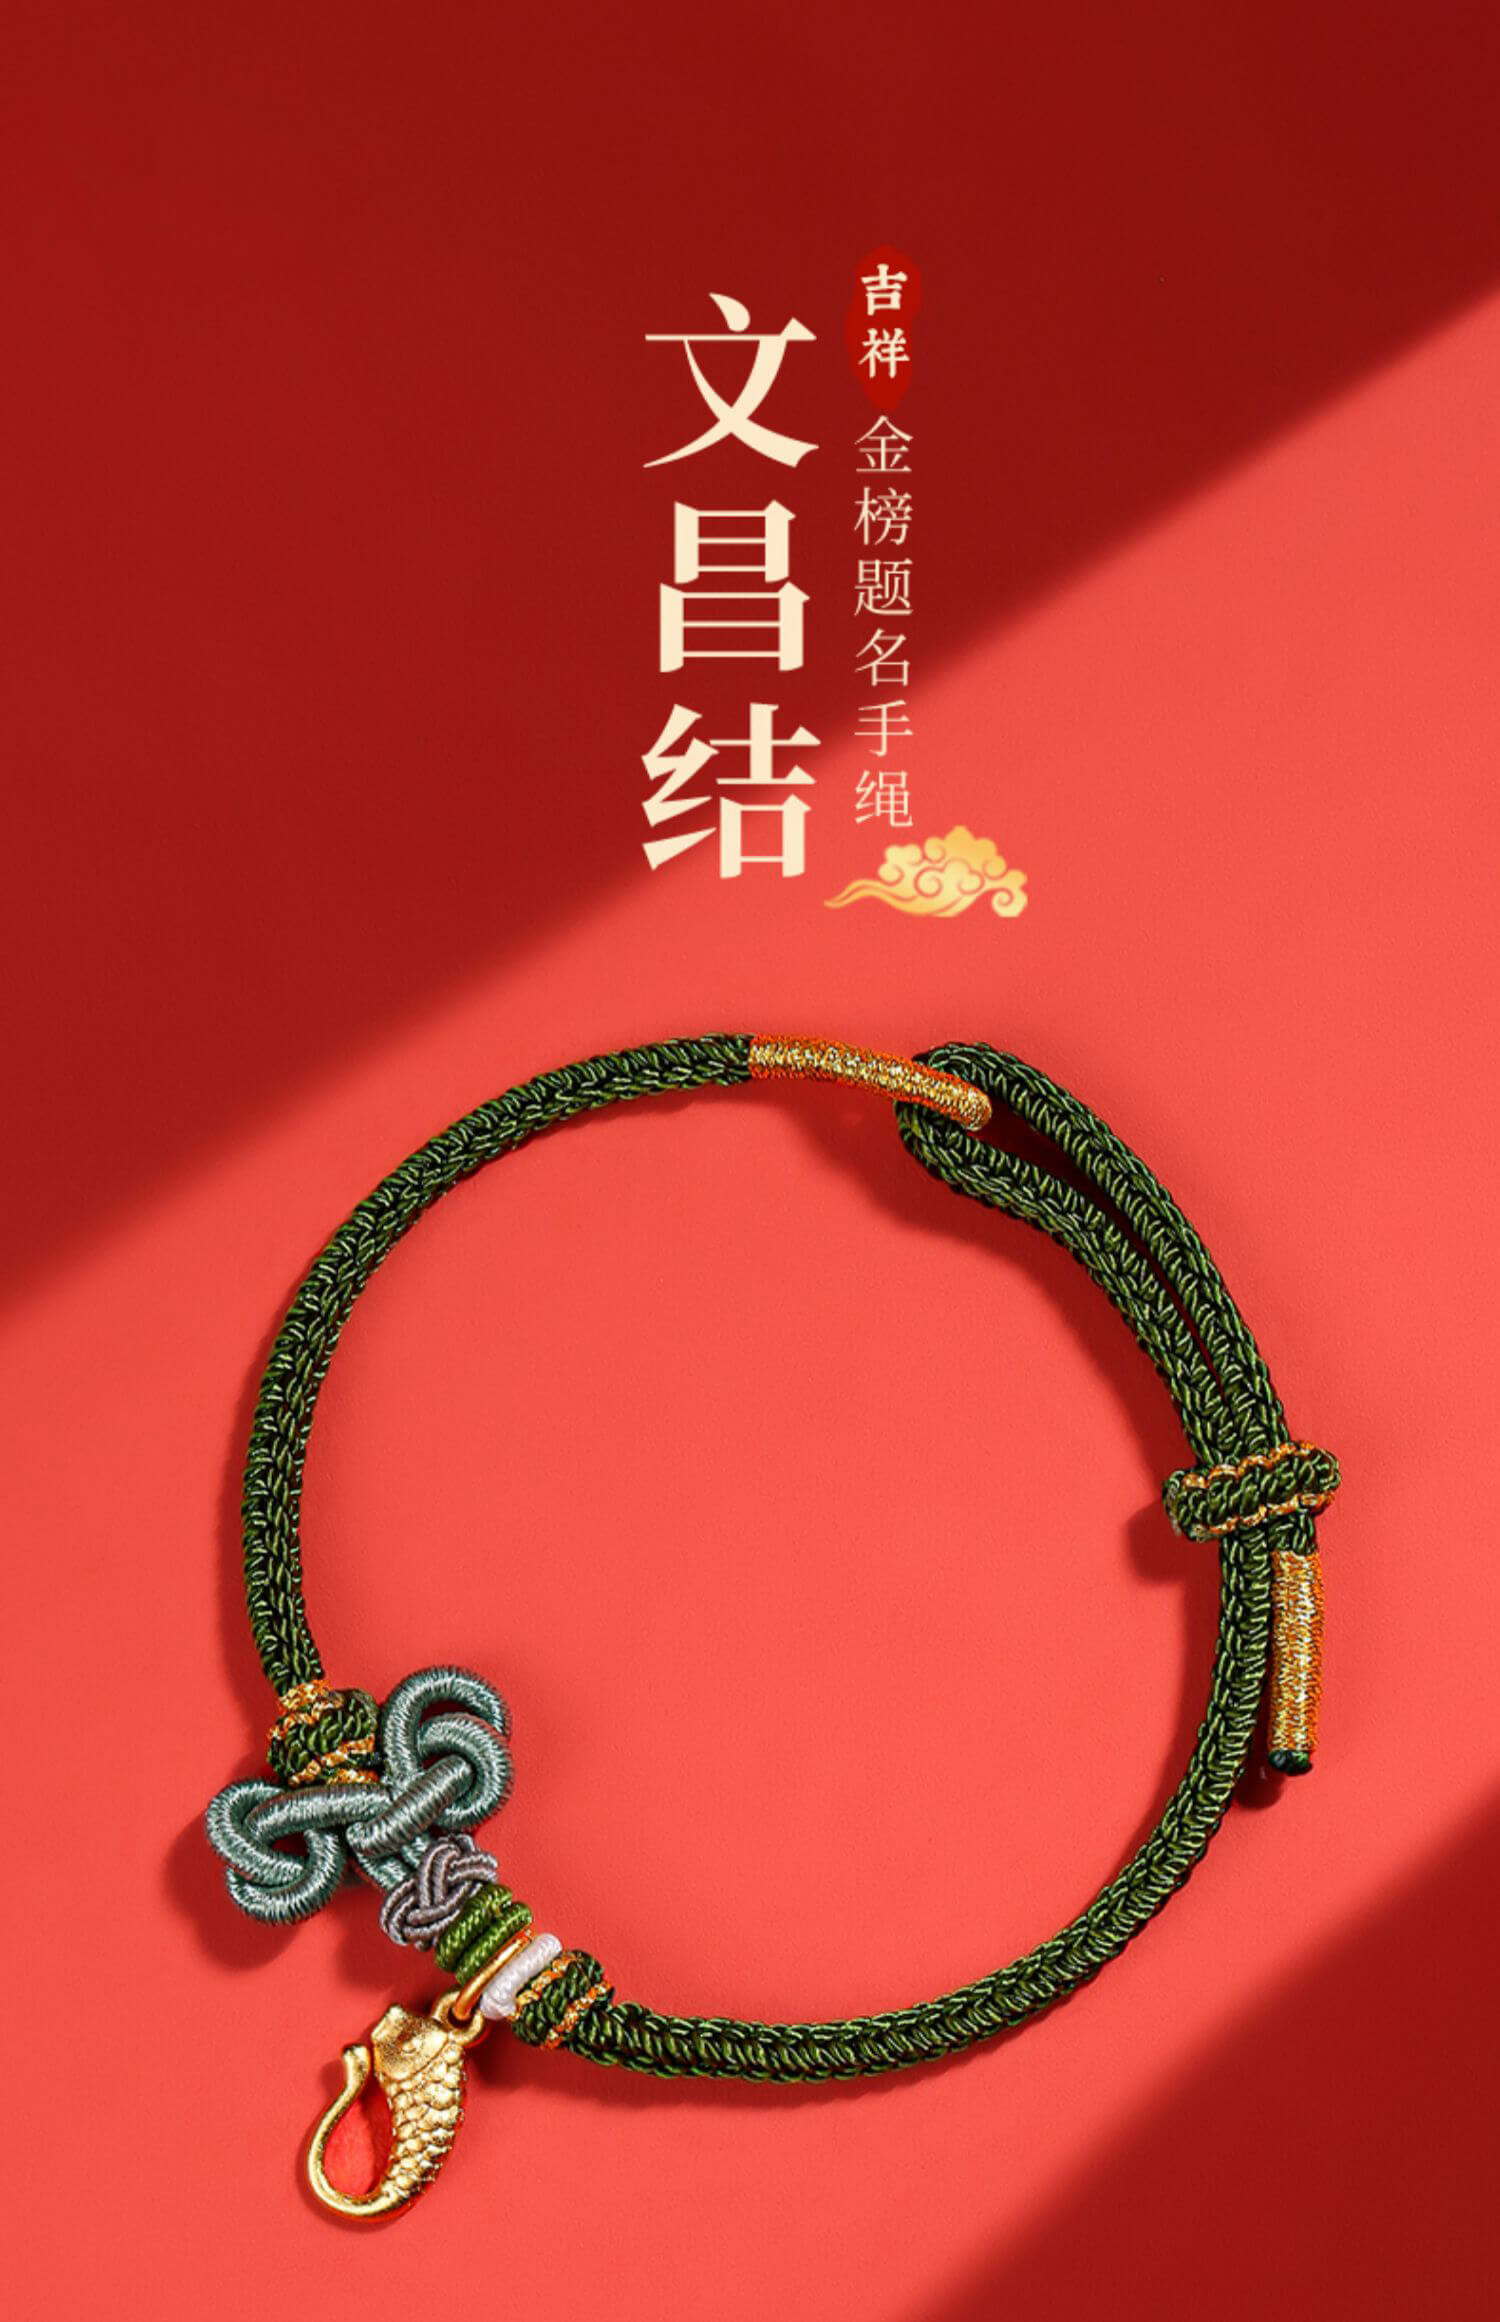 《Scholarly Success》 Wenchang Knot Red Rope Bracelet, Ensures Passing Exams